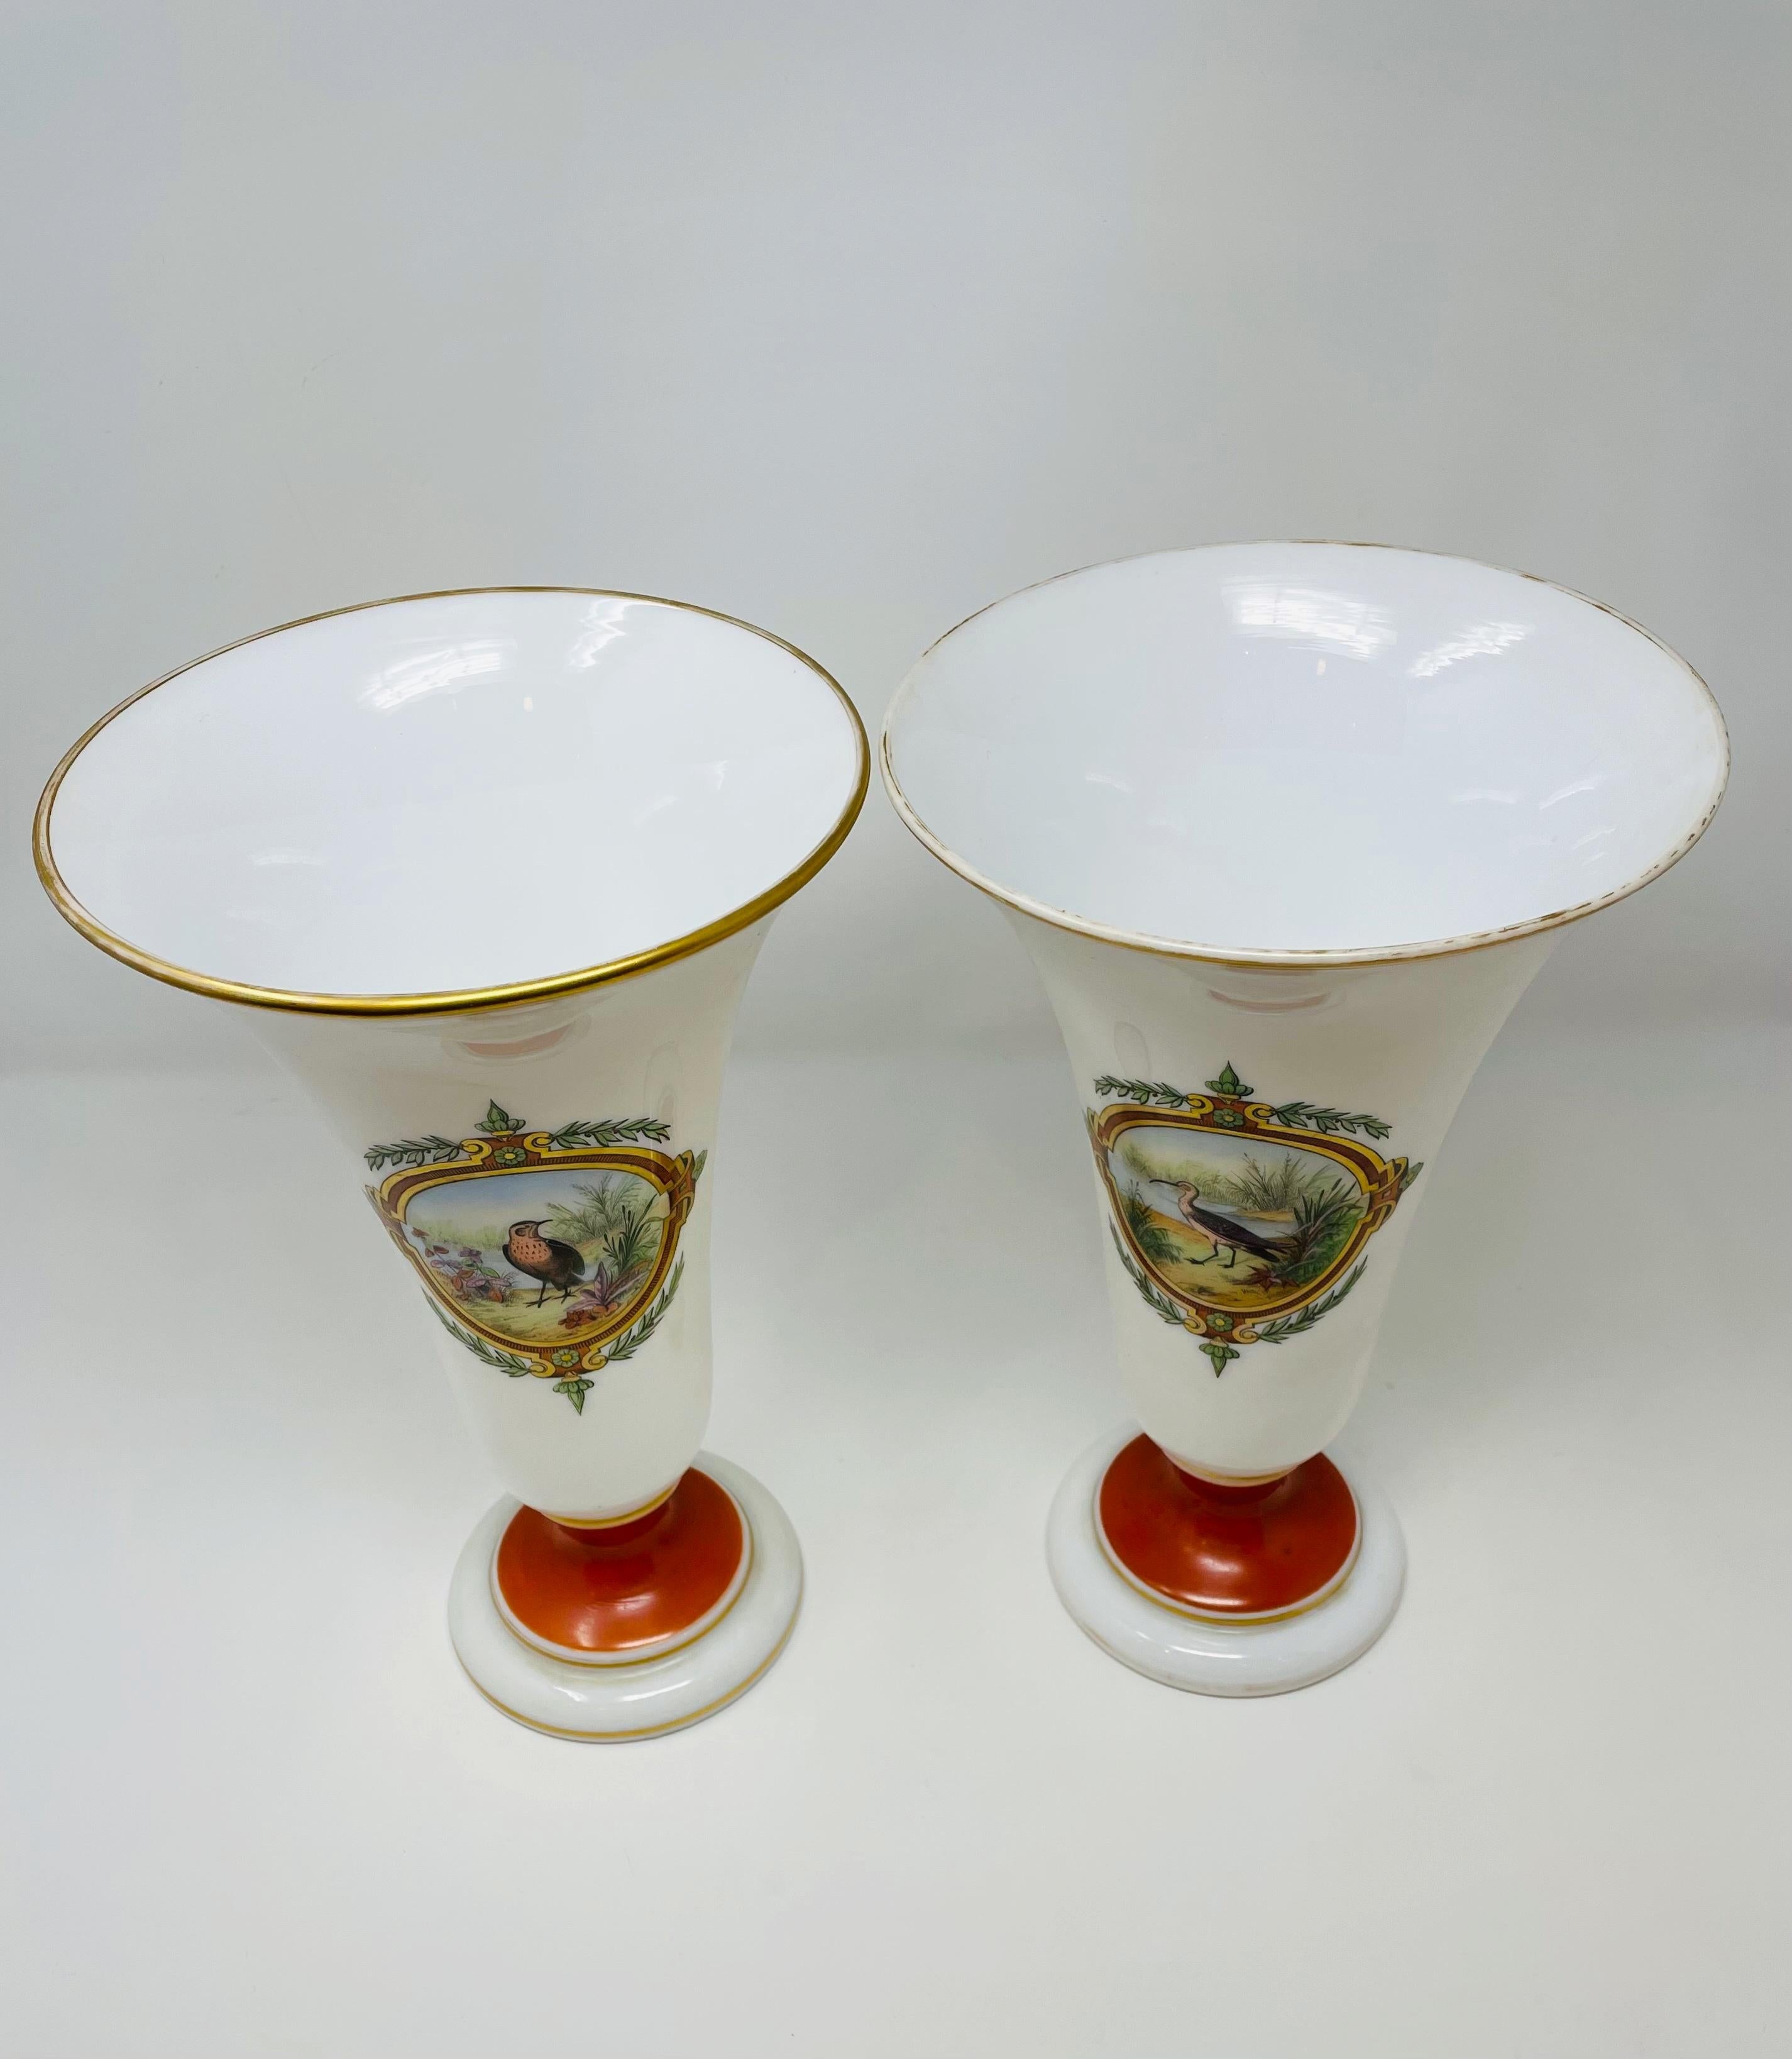 19th Century Pair of Opaline Vases, French, circa 1880